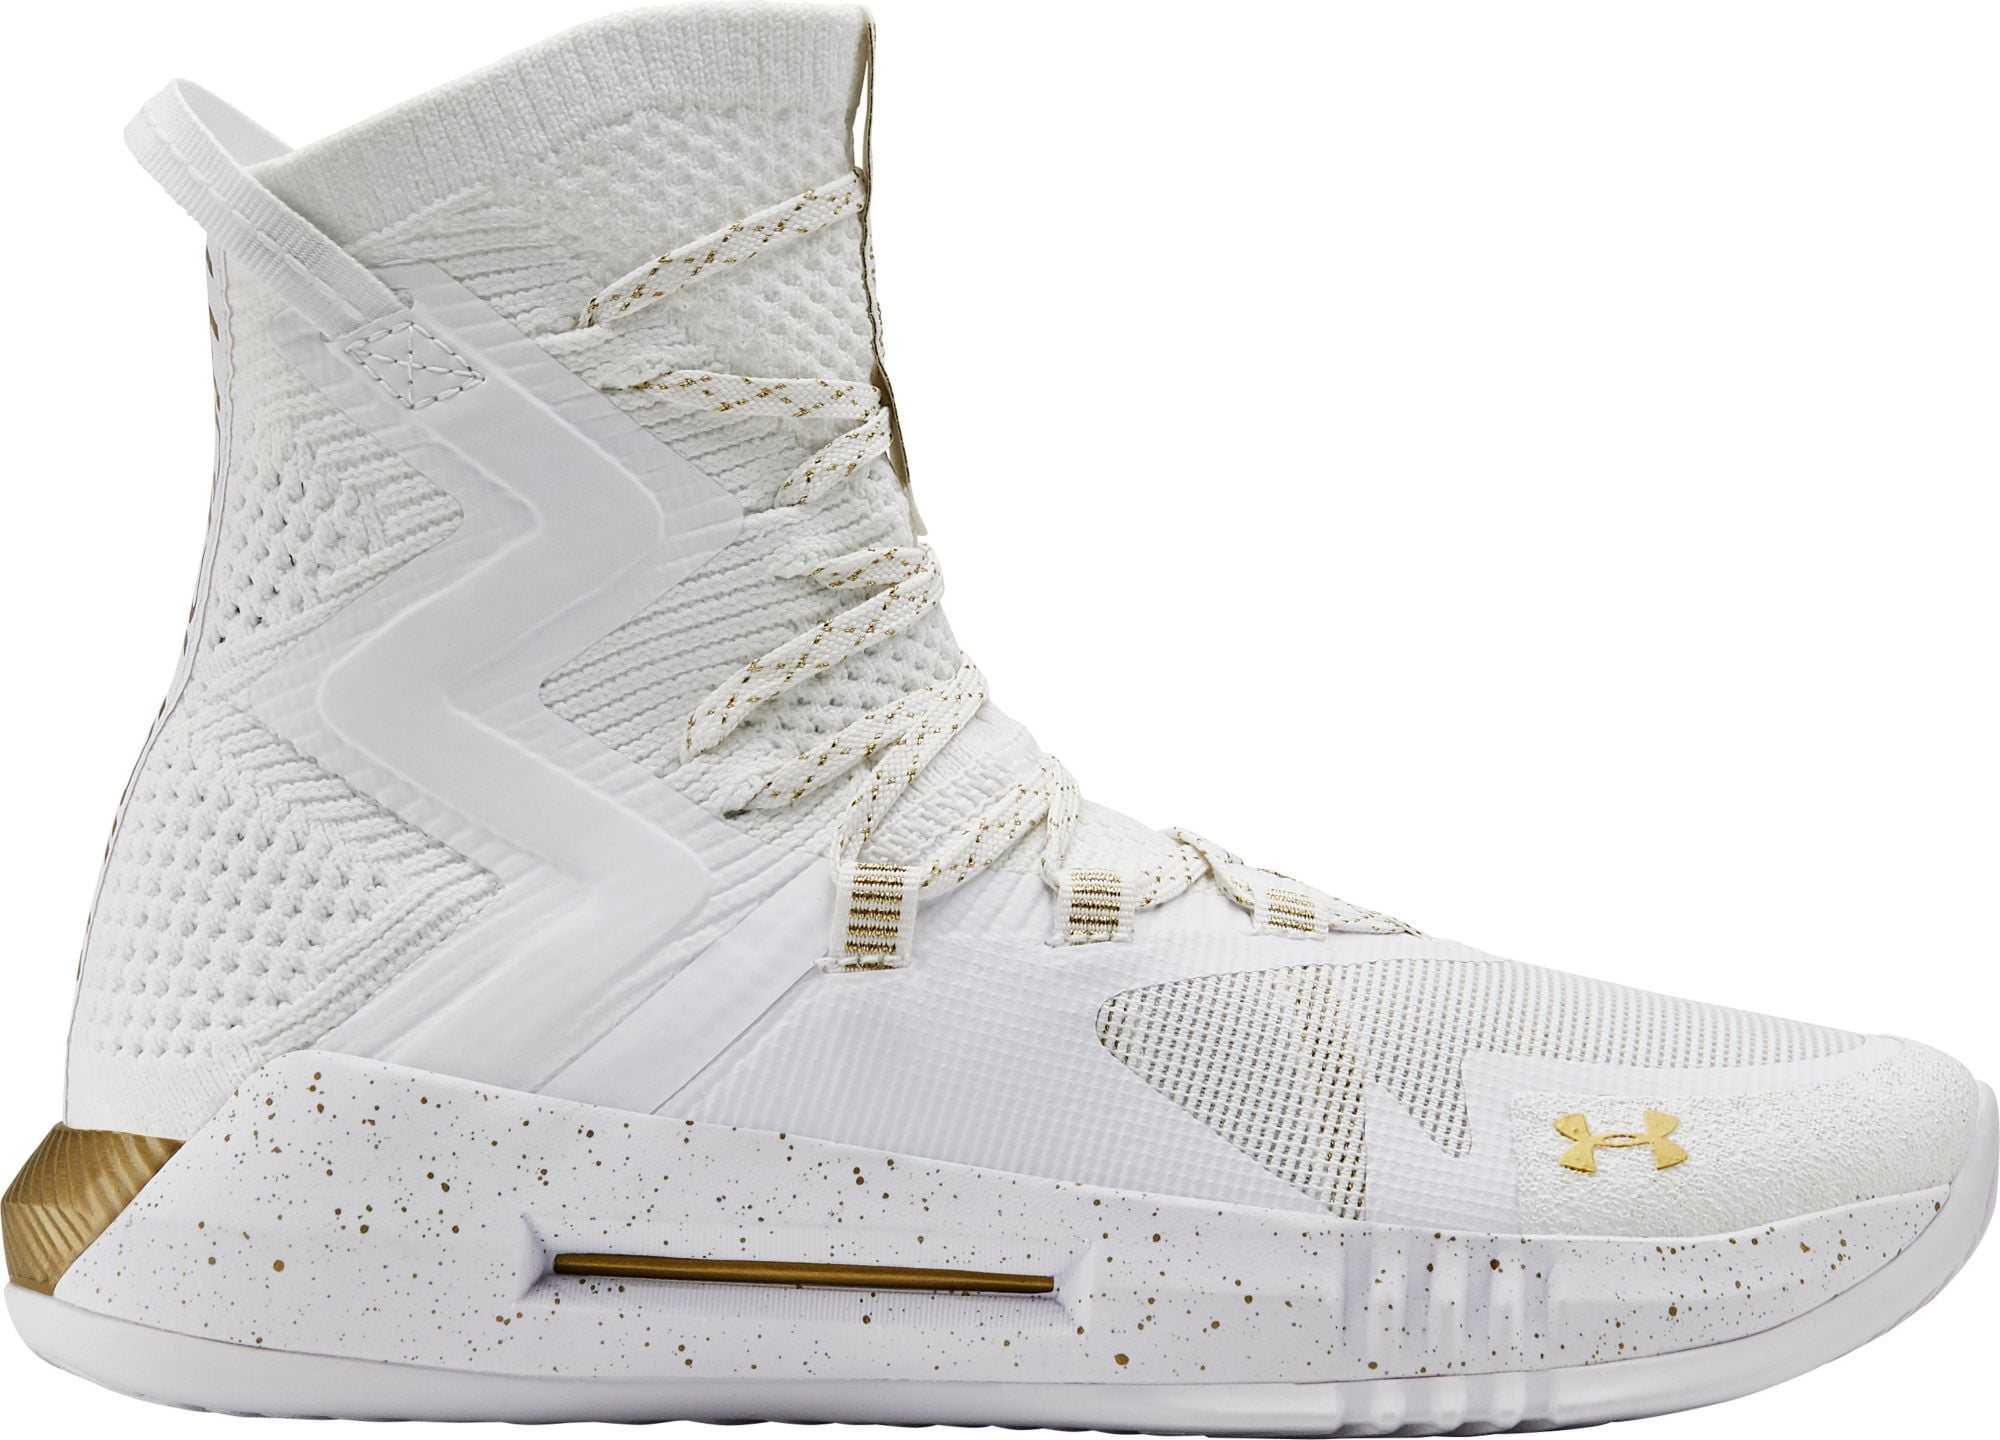 white under armour volleyball shoes